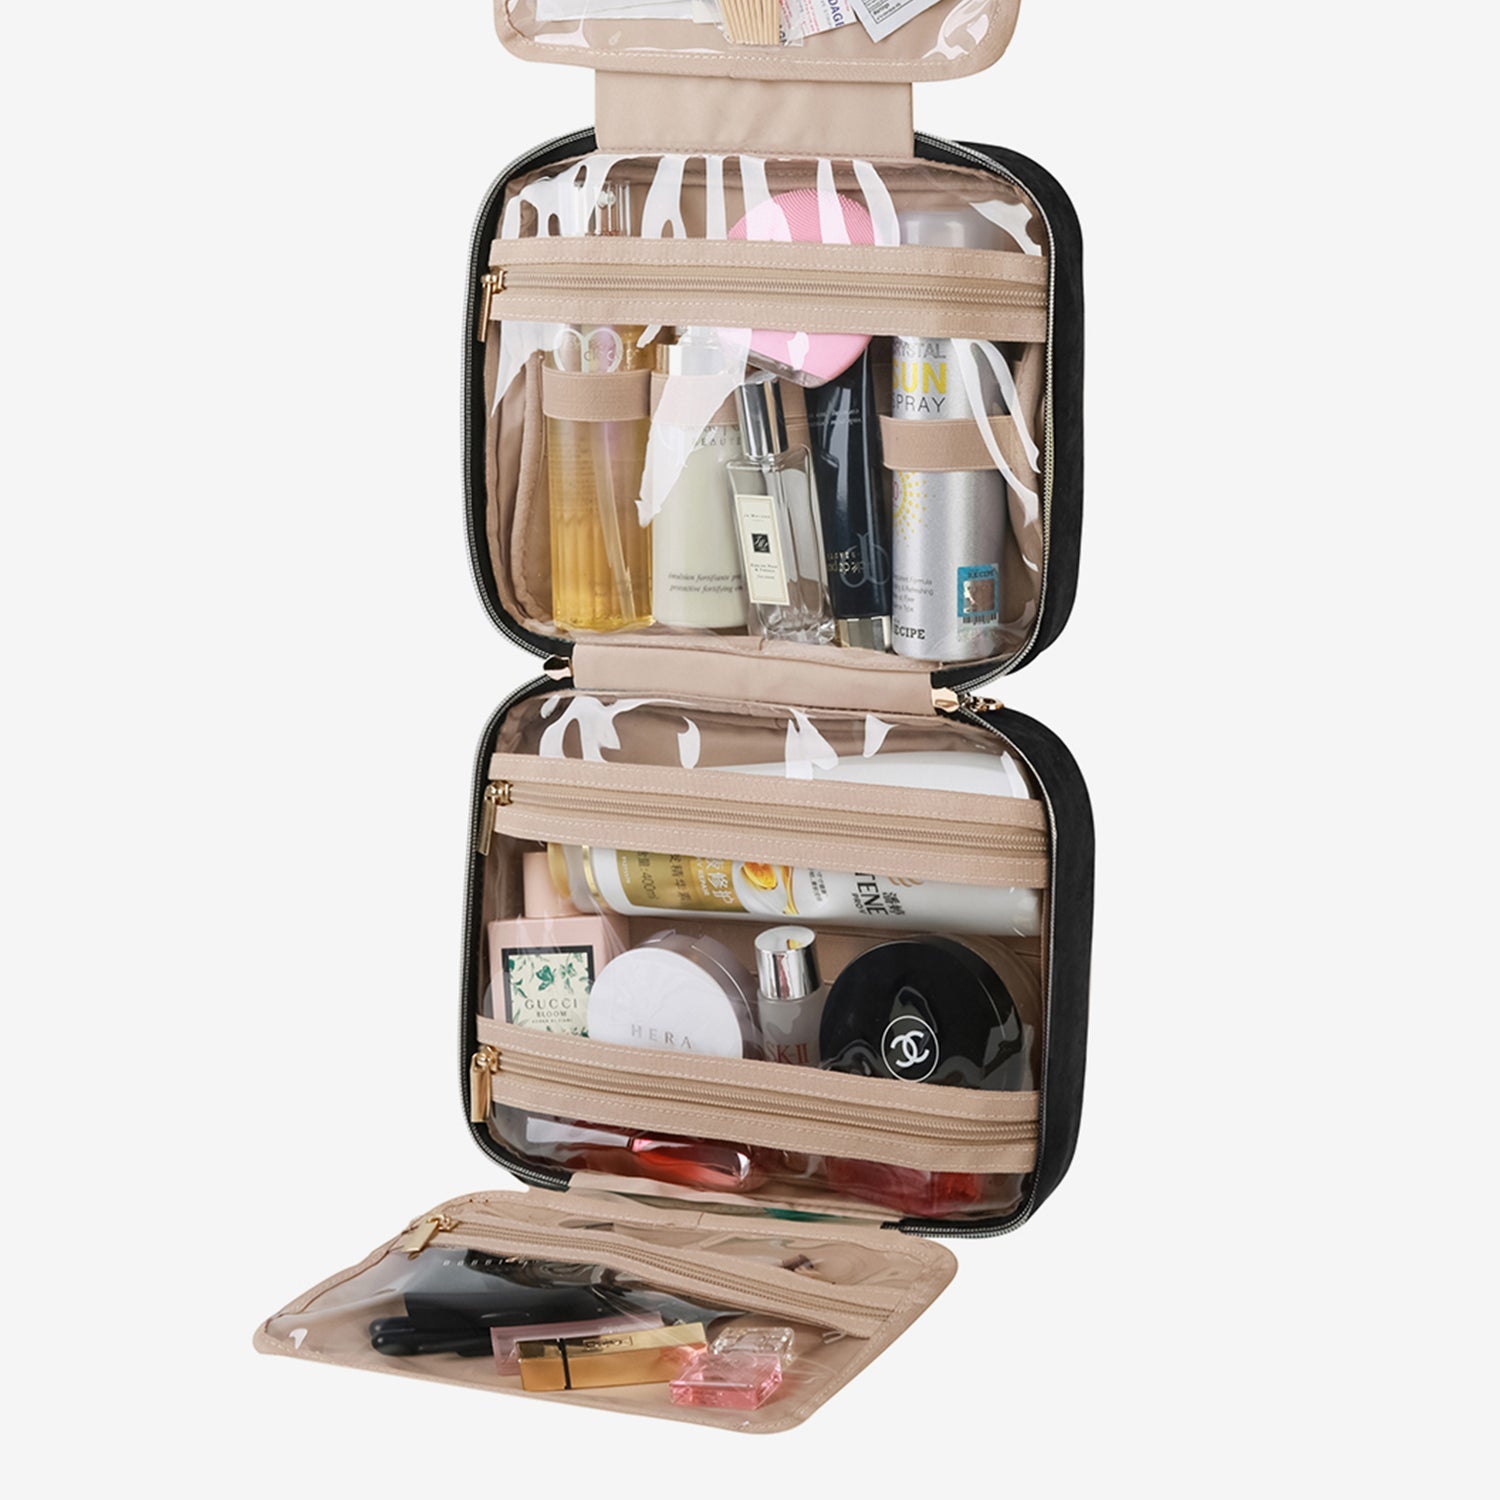 The Space Saver Hanging Toiletry Bag